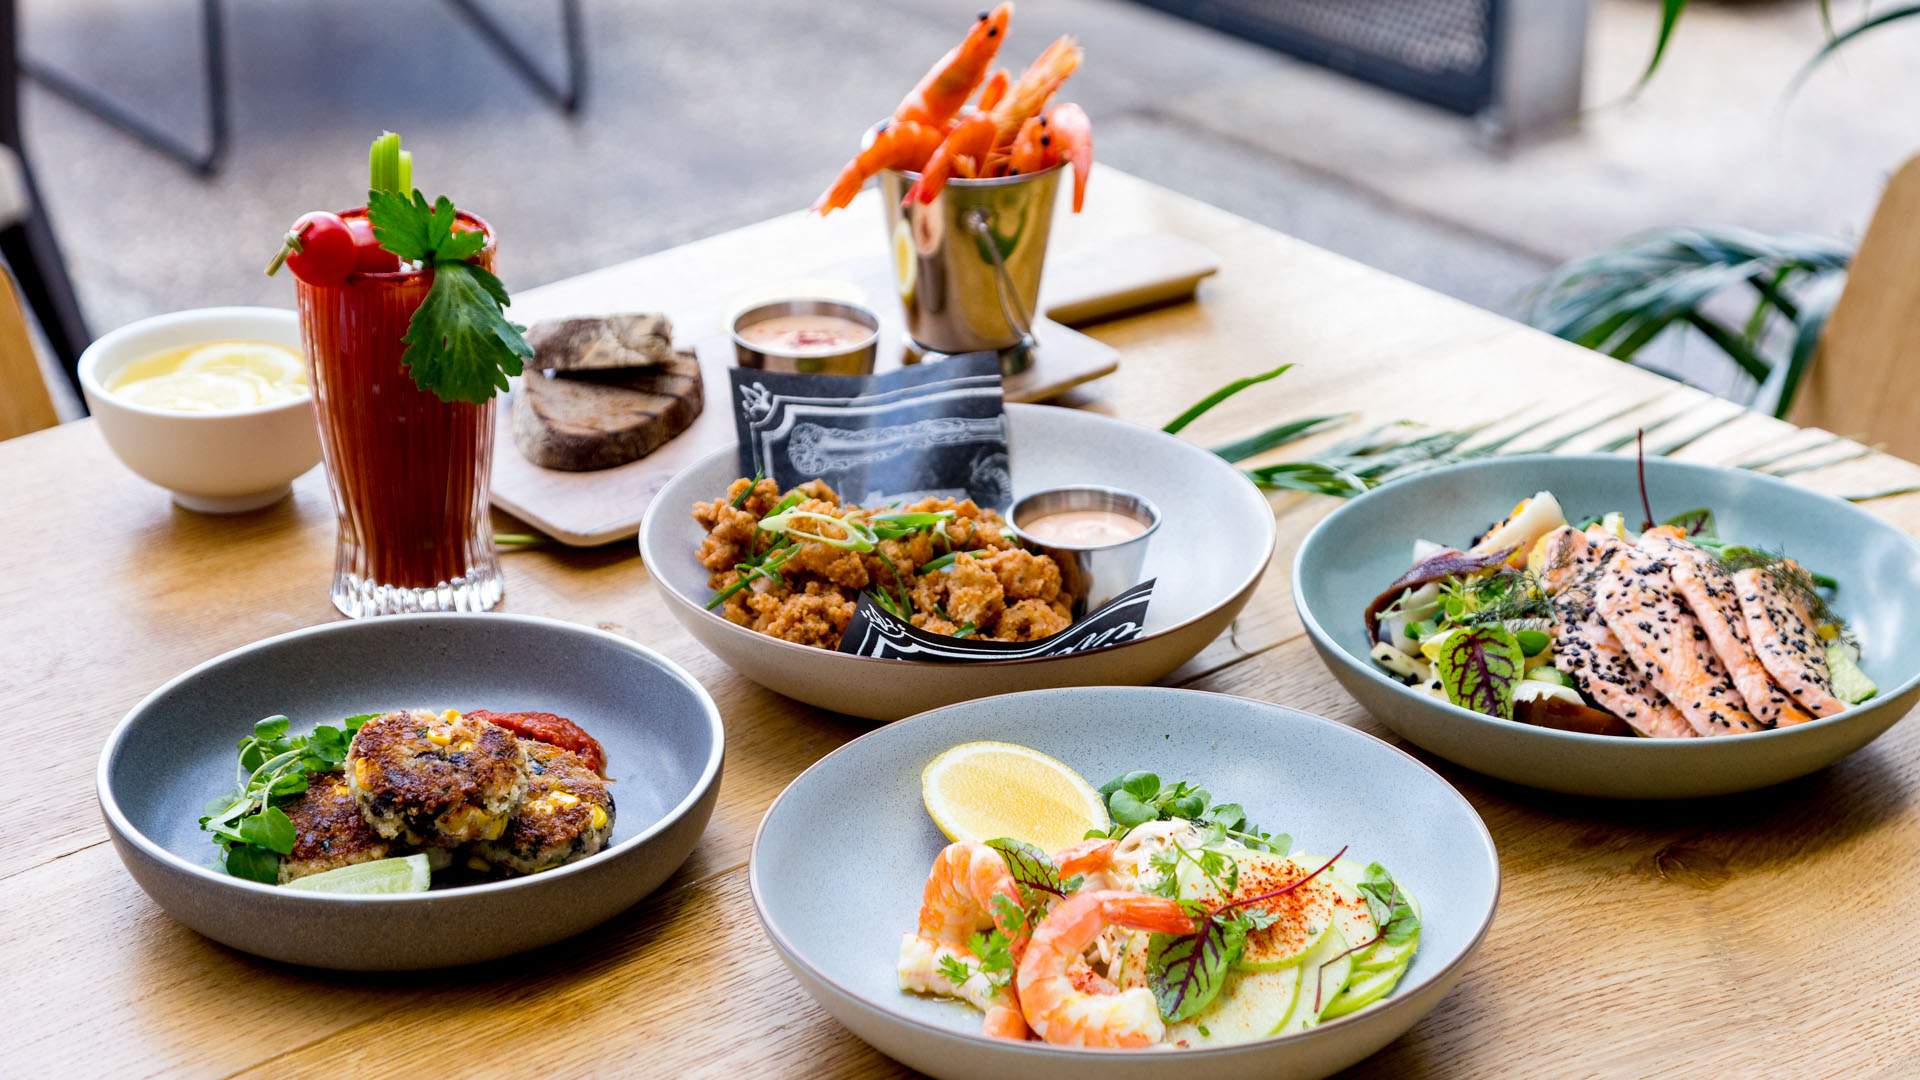 Brunch dishes at Proud Mary in Collingwood - Melbourne Cafe.